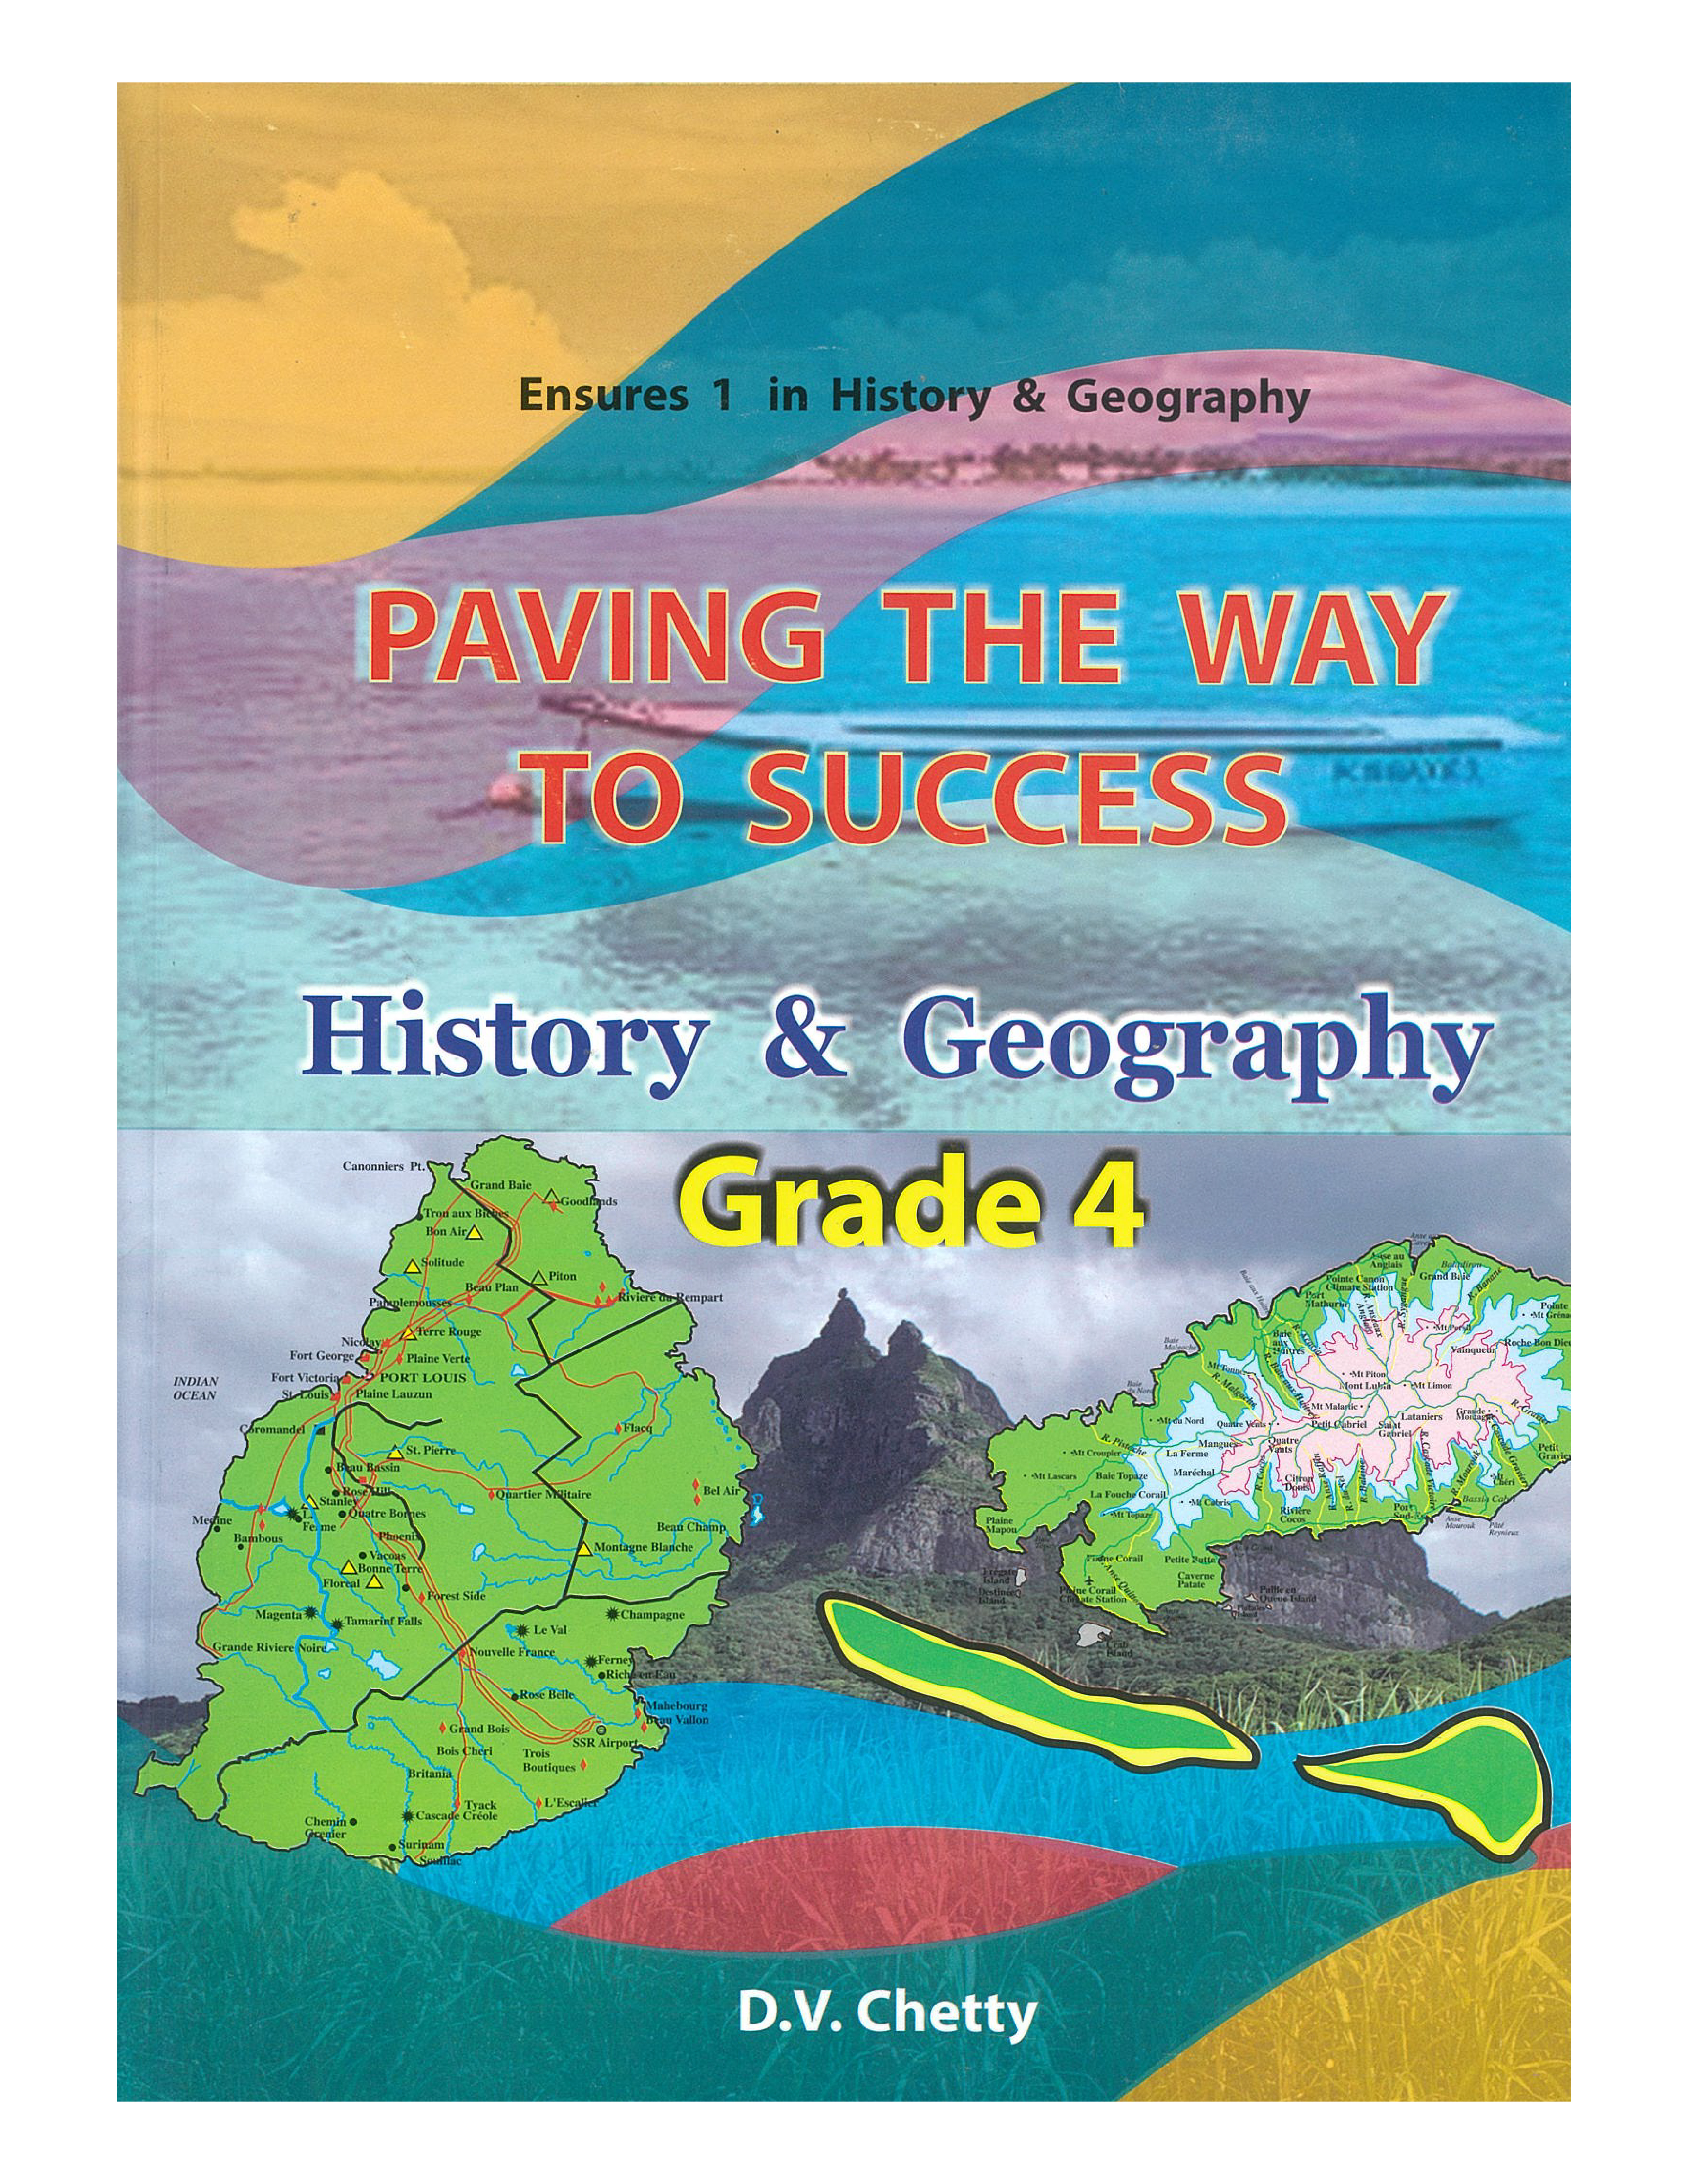 PAVING THE WAY TO SUCCESS HISTORY AND GEOGRAPHY GRADE 4 - CHETTY